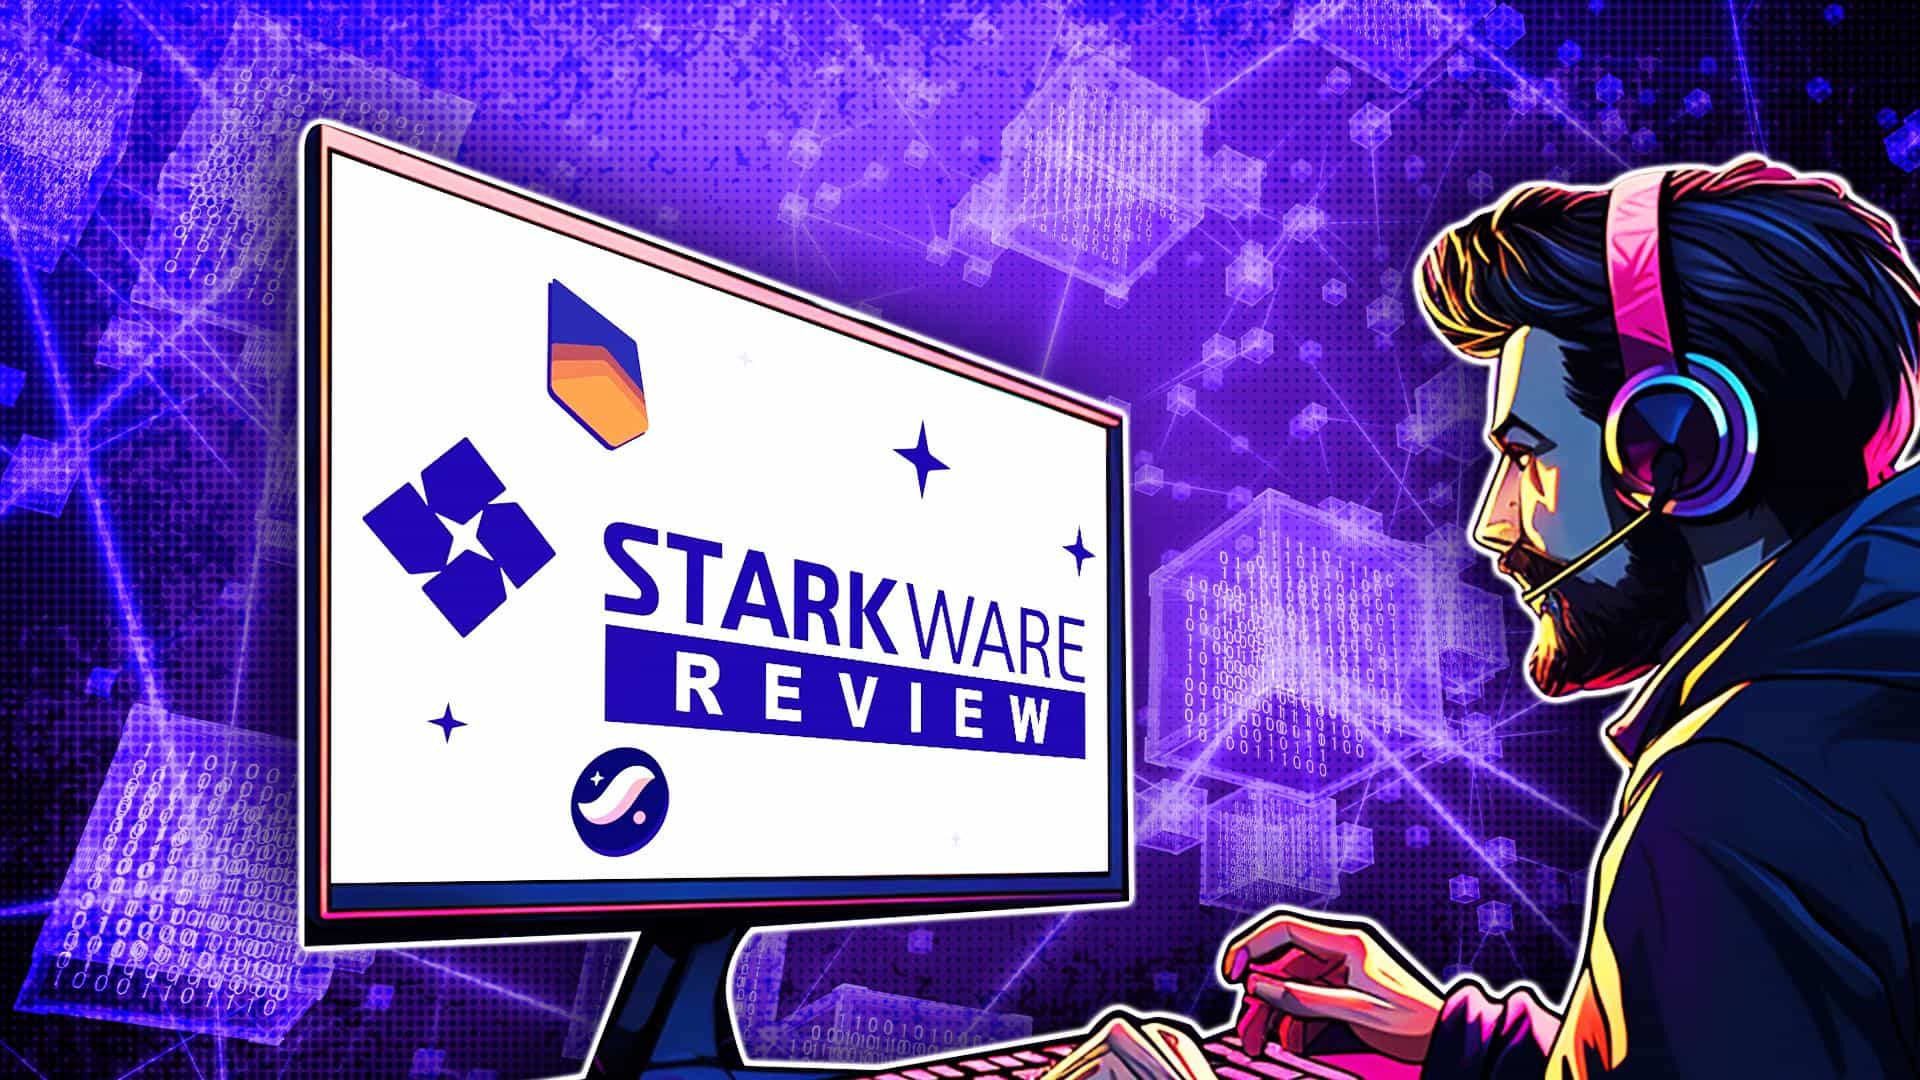 StarkWare Review: Advancing Blockchain With STARK Proofs